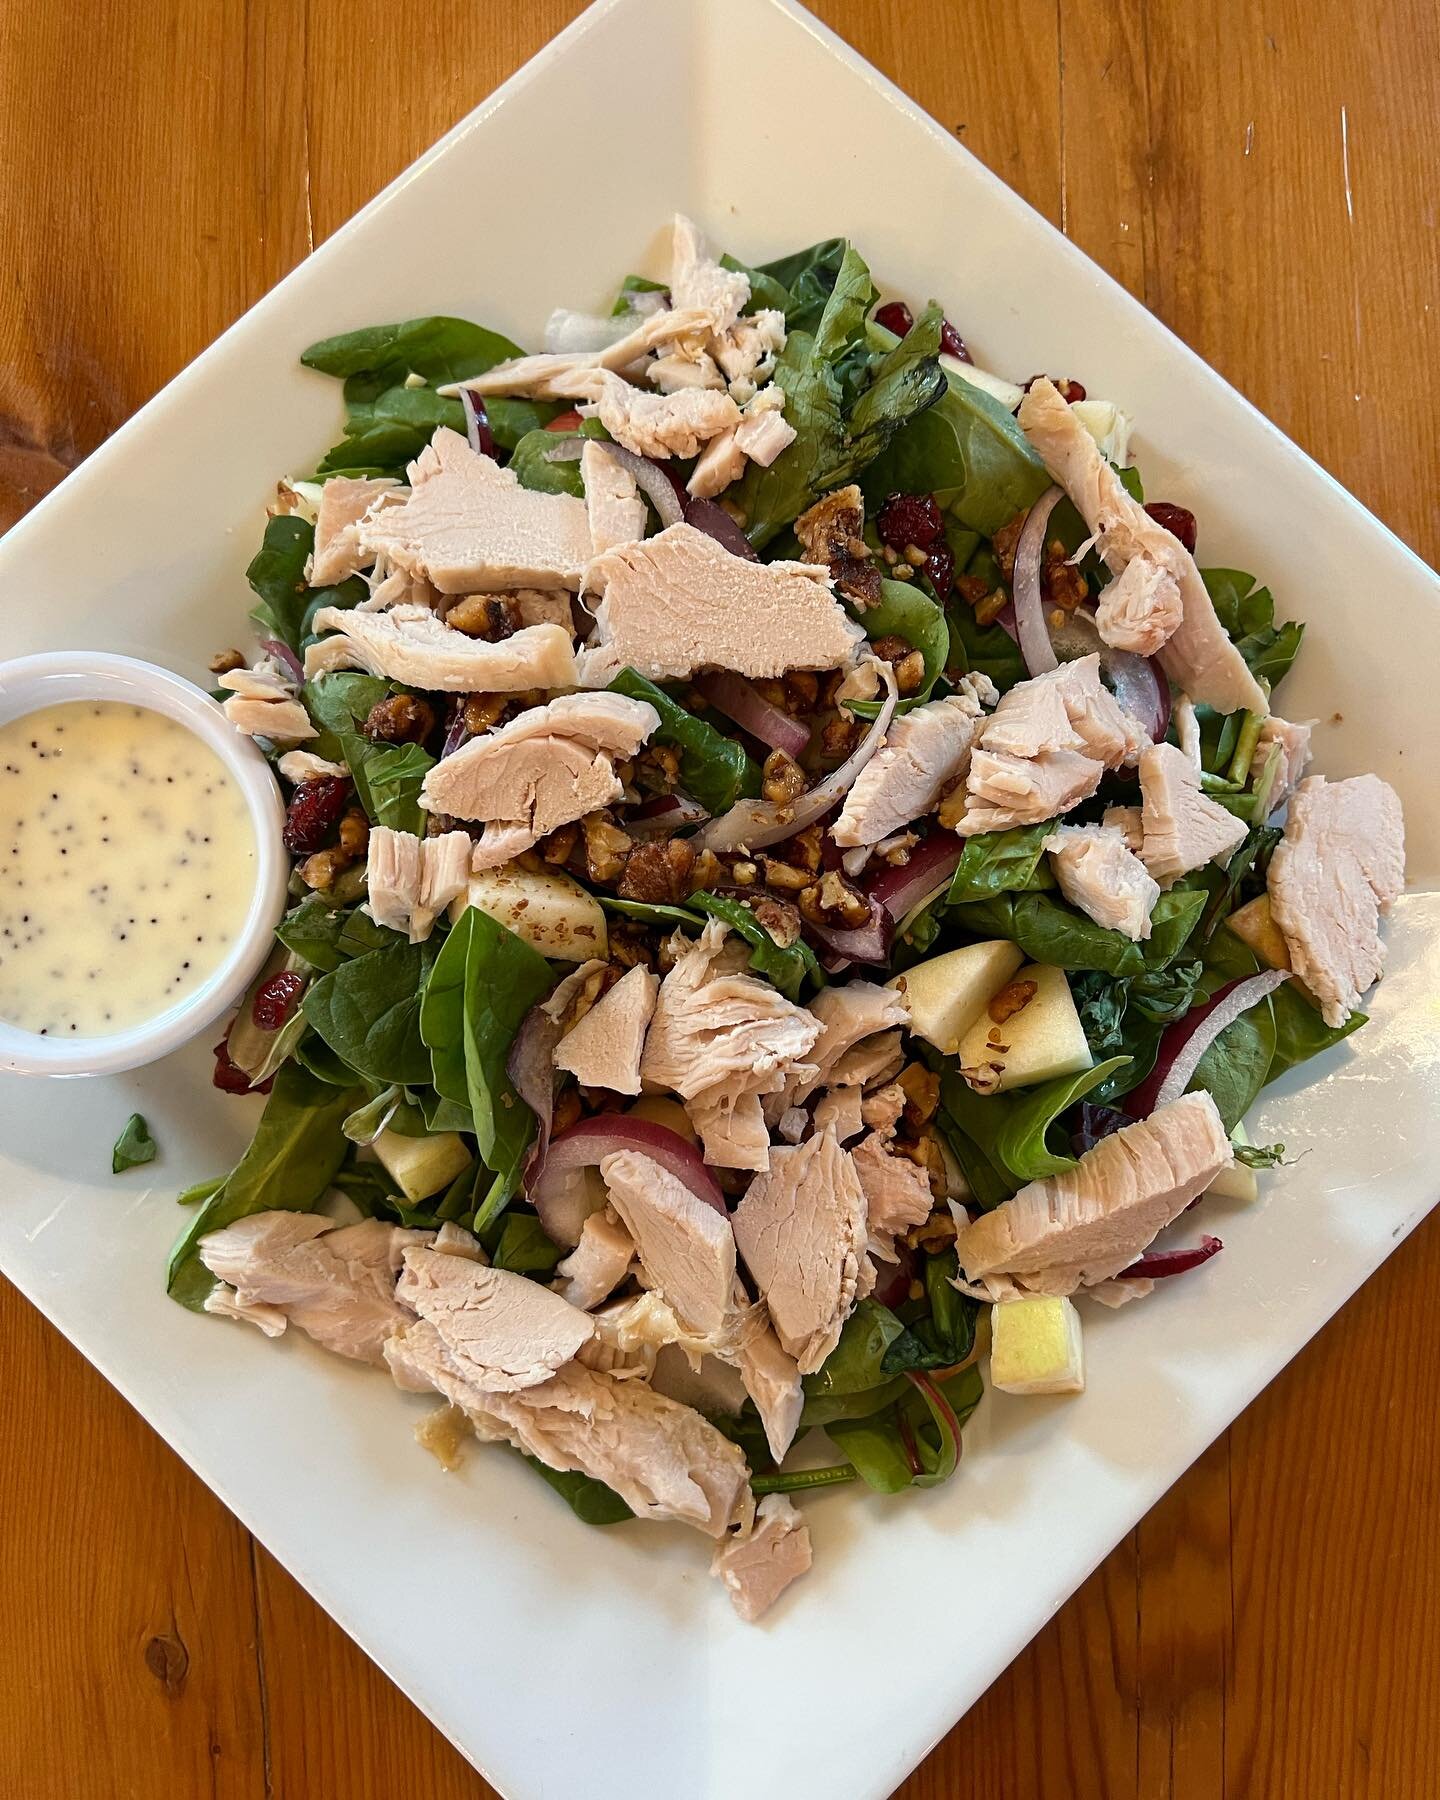 Just in case you need an extra fill of turkey this week, we&rsquo;ve got you covered with our features. 

Turkey Harvest Salad - spring mix, roasted turkey, diced apples, dried cranberries, red onion, goat cheese crumbles, candied walnuts, choice of 